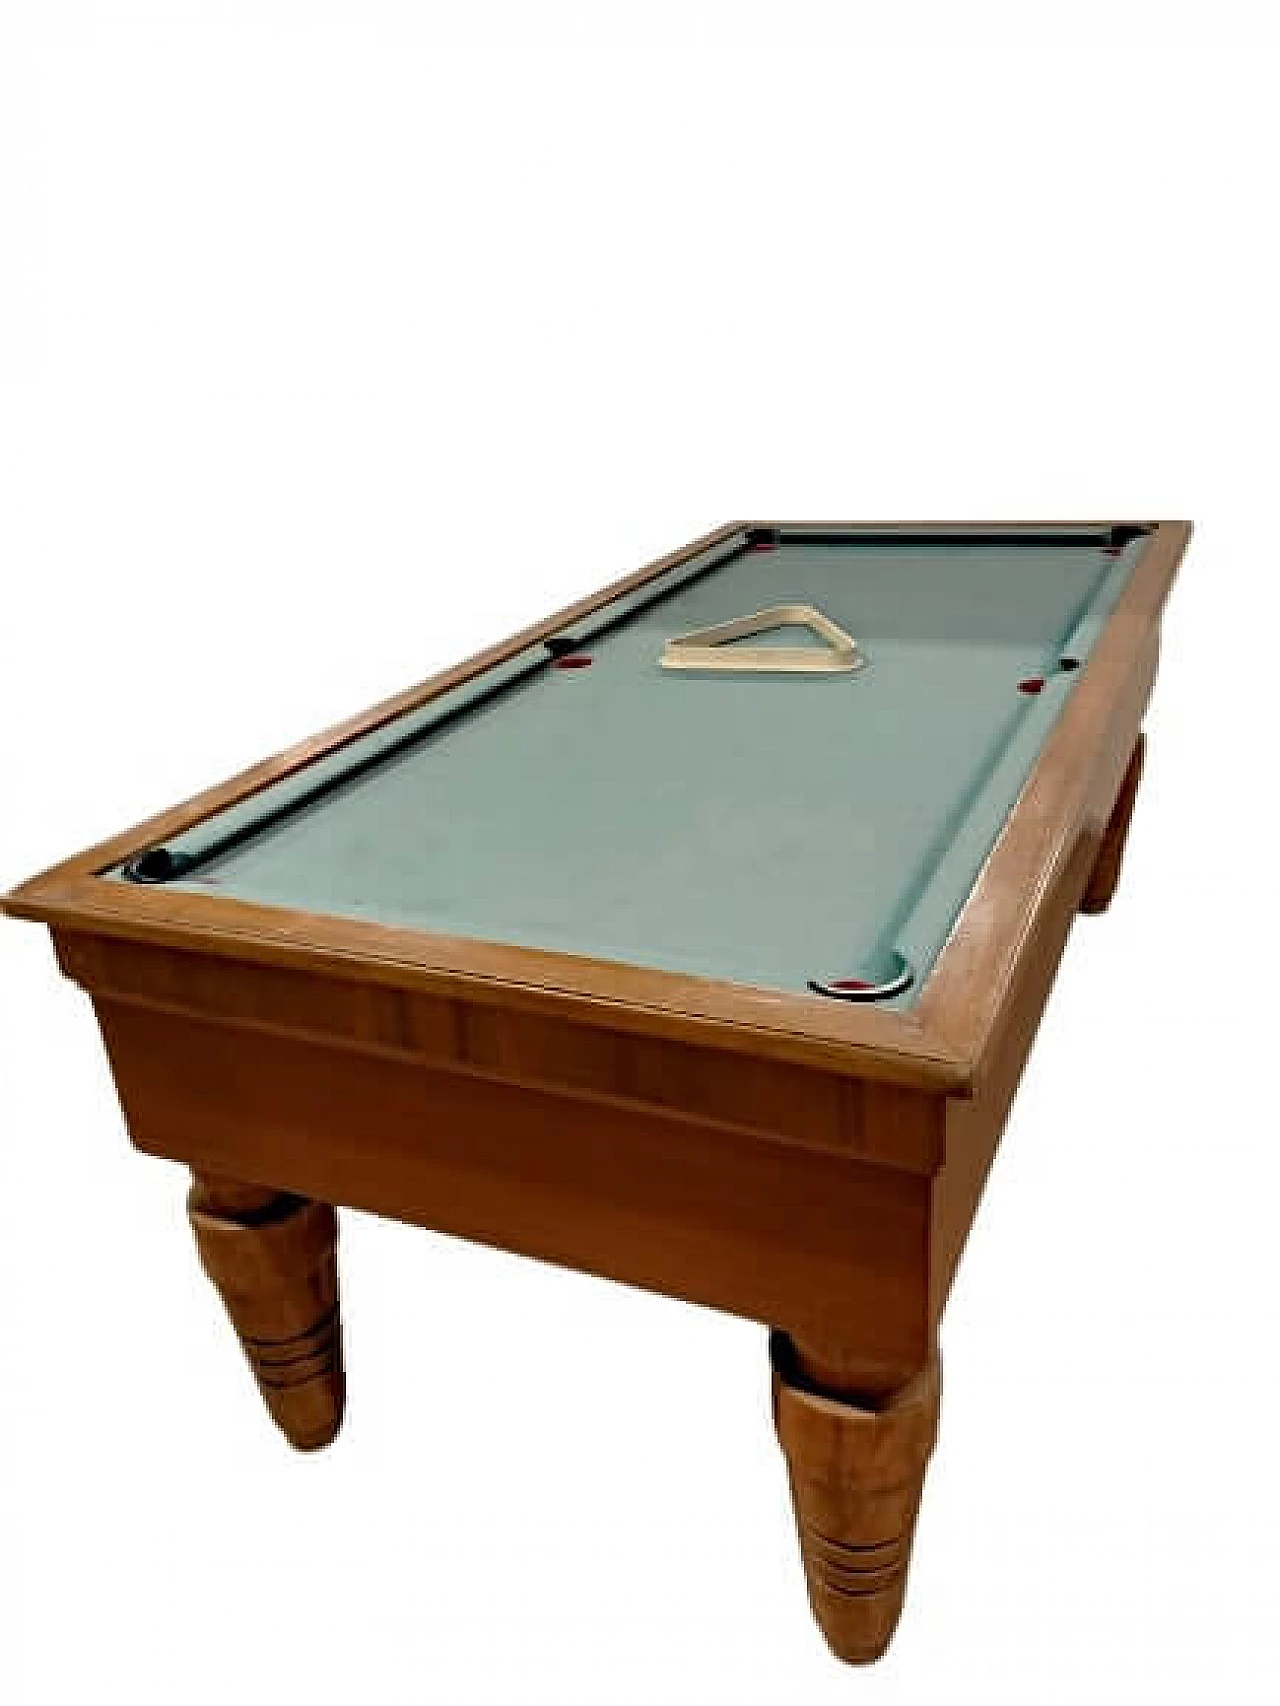 6-hole wooden pool table, 1960s 3